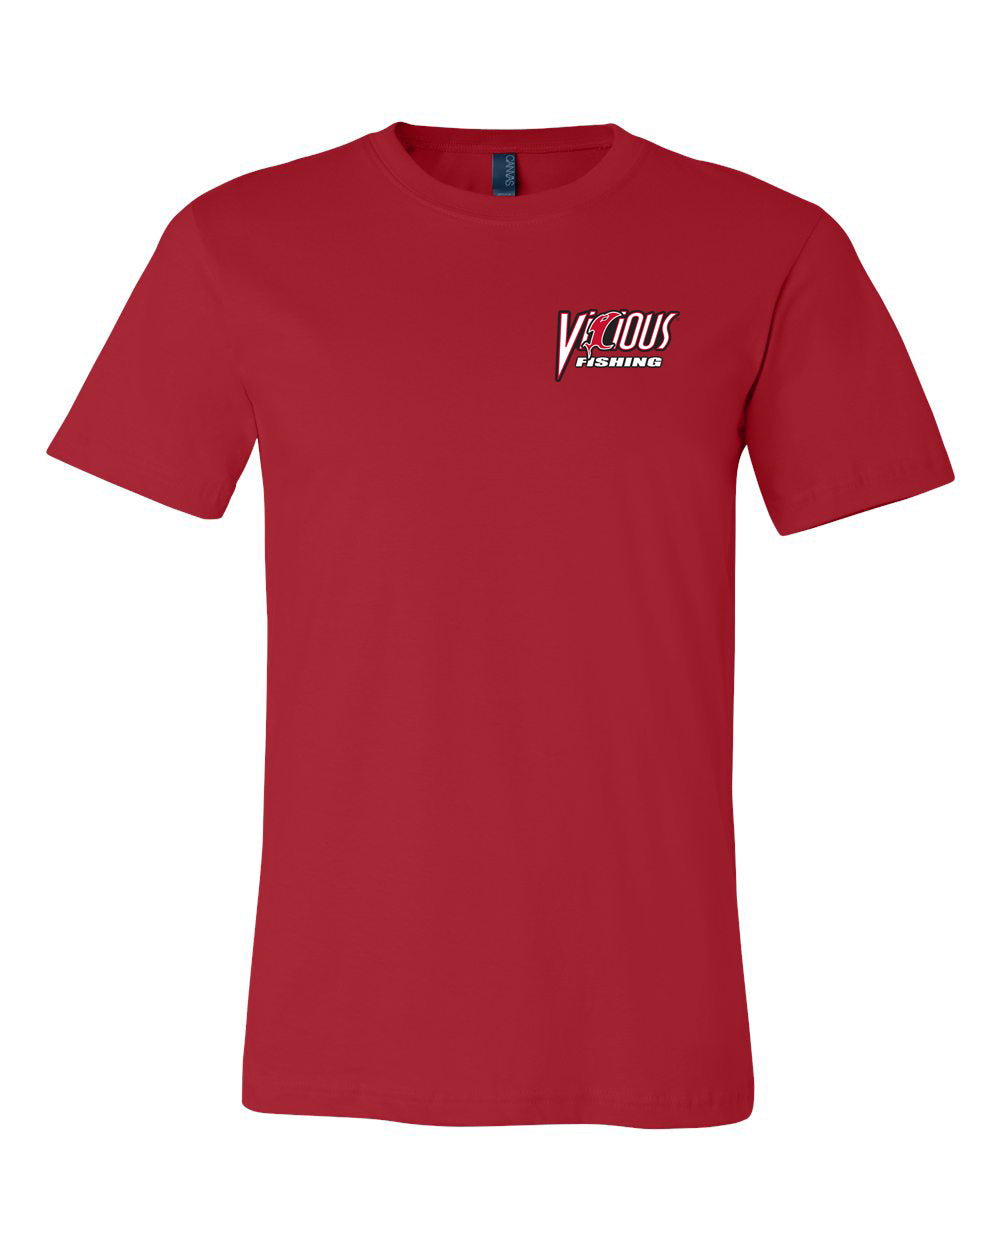 Vicious Classic "Get Vicious" Logo Tee - Red